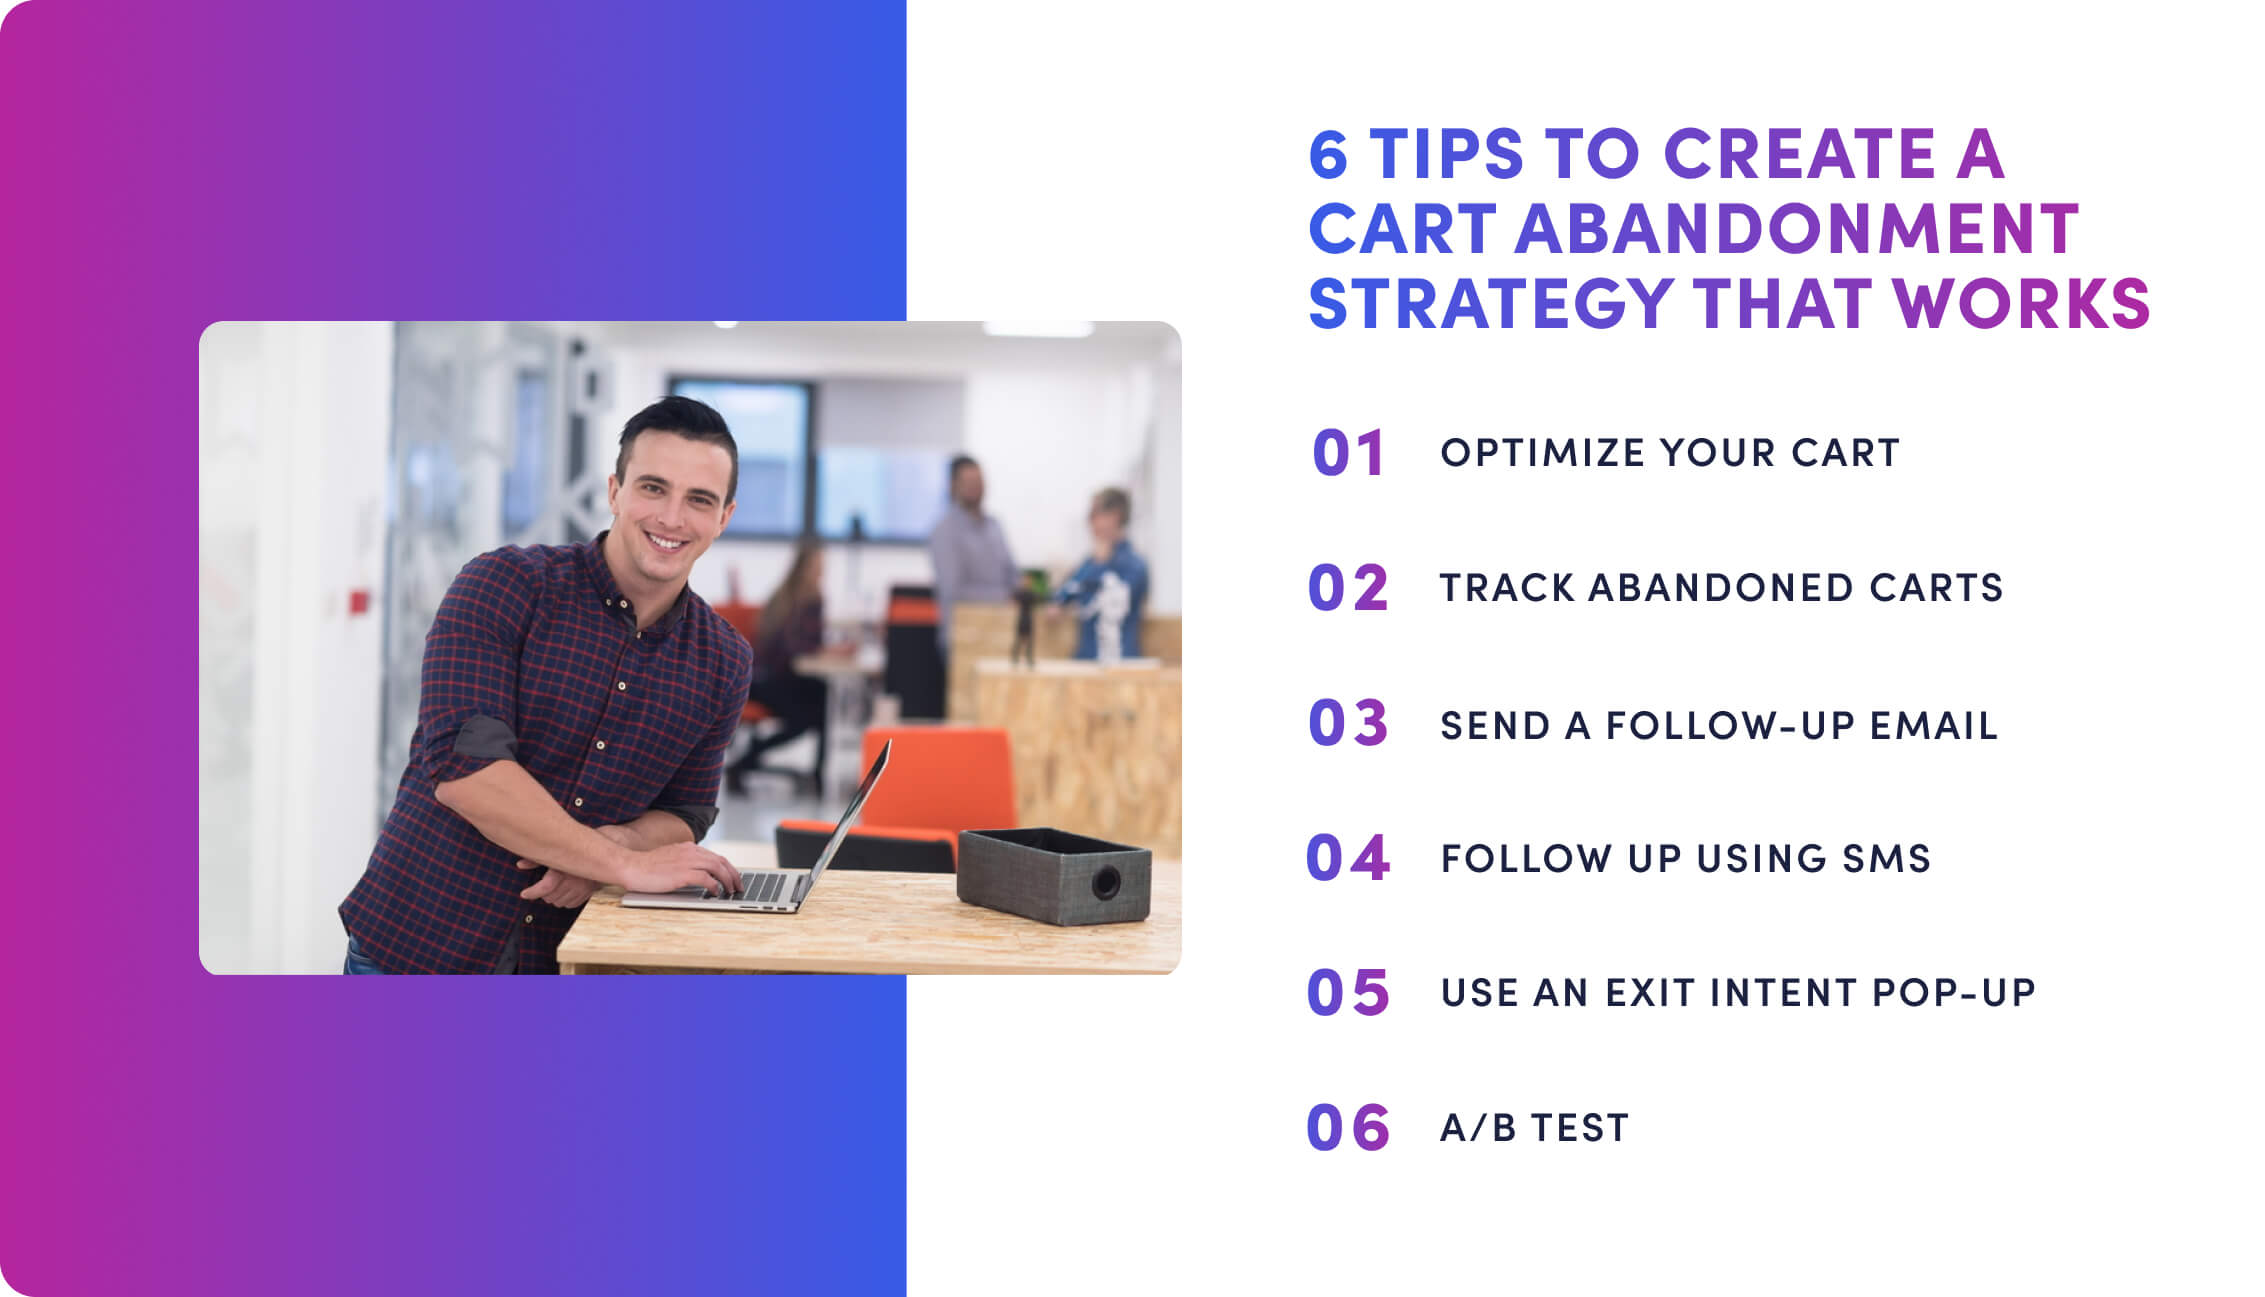 Cart Abandonment Strategy Tips